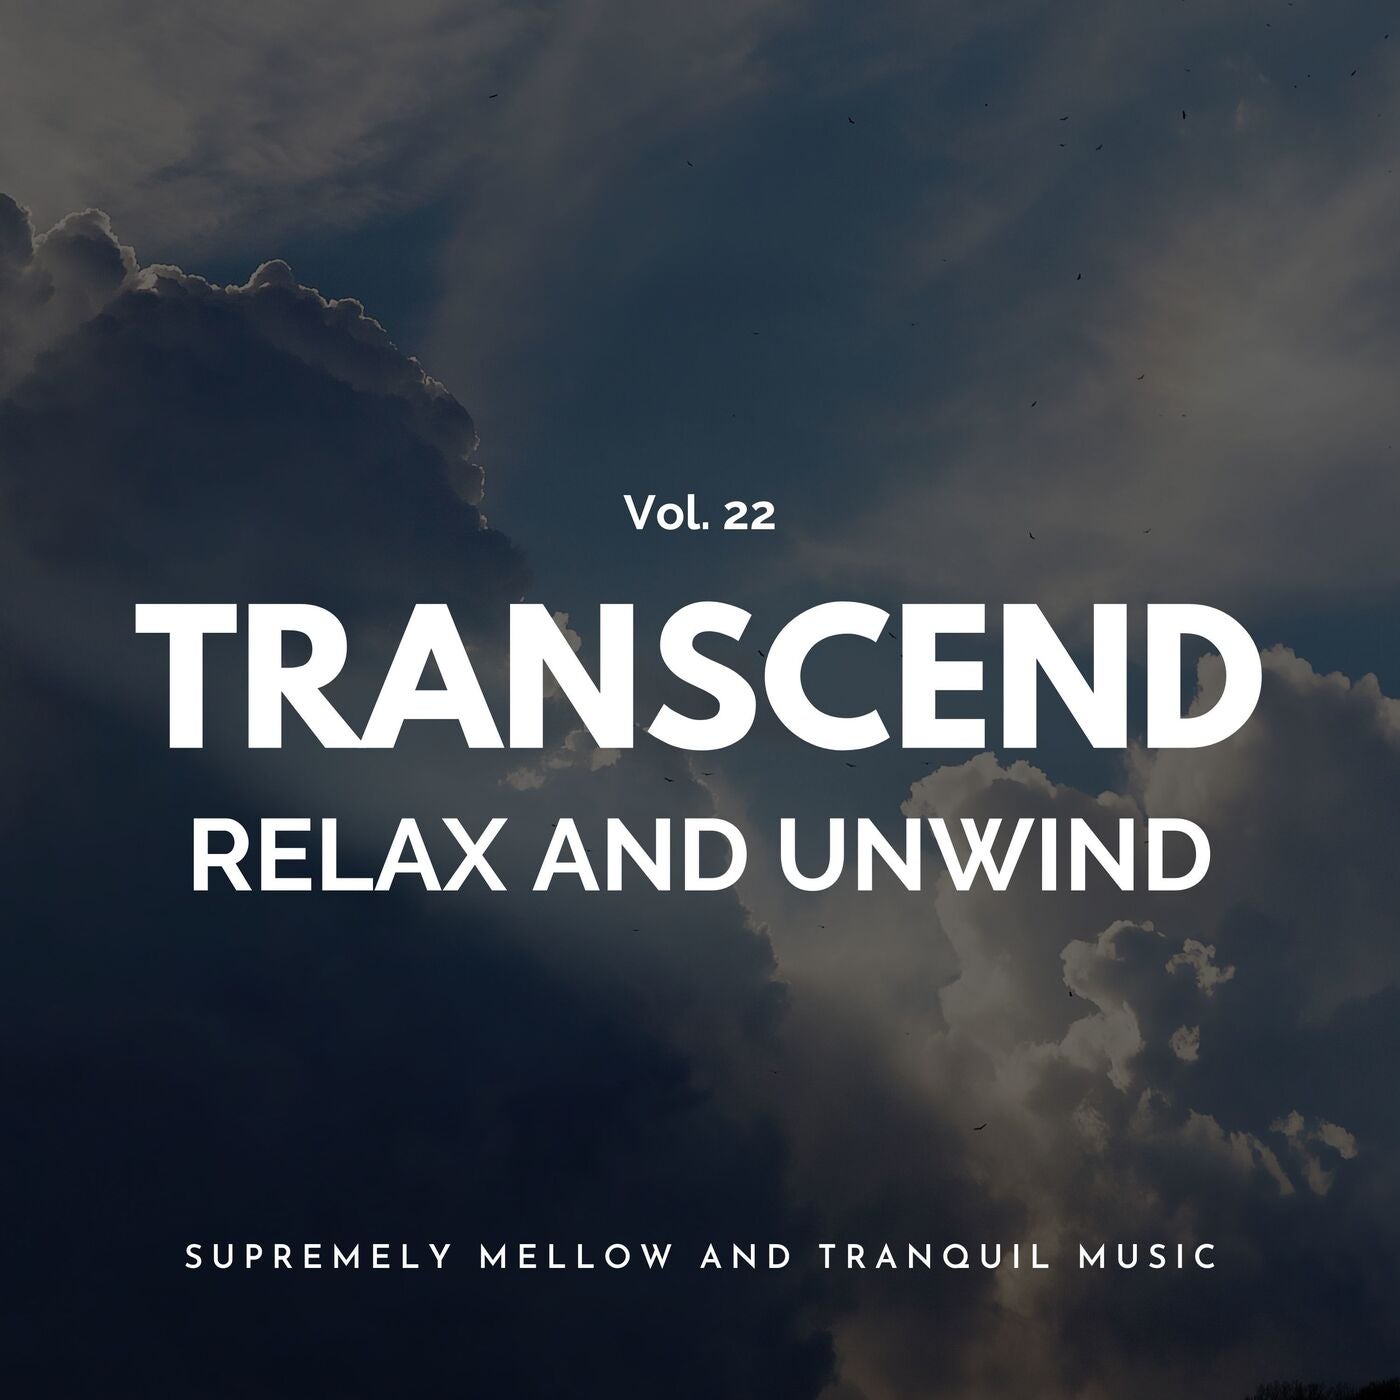 Transcend Relax And Unwind - Supremely Mellow And Tranquil Music, Vol. 22